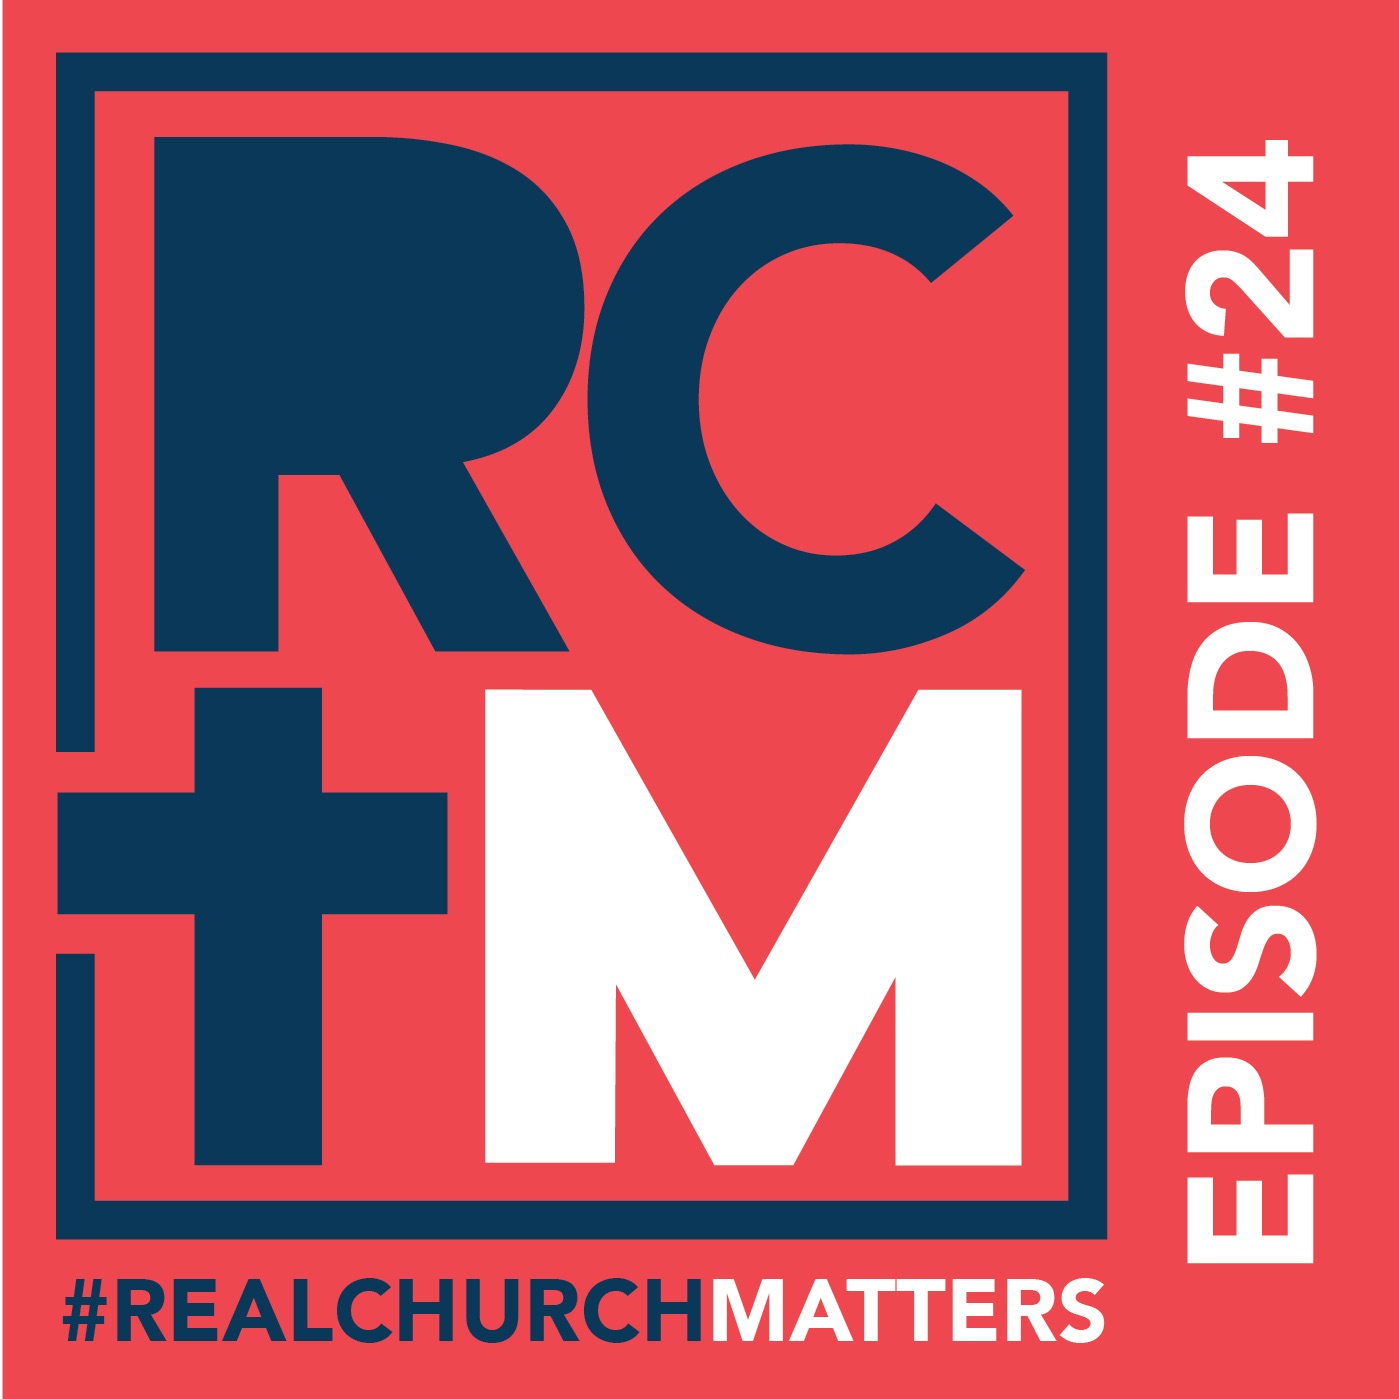 Episode 24 - When Do Christians Get To Let Their Hair Down?